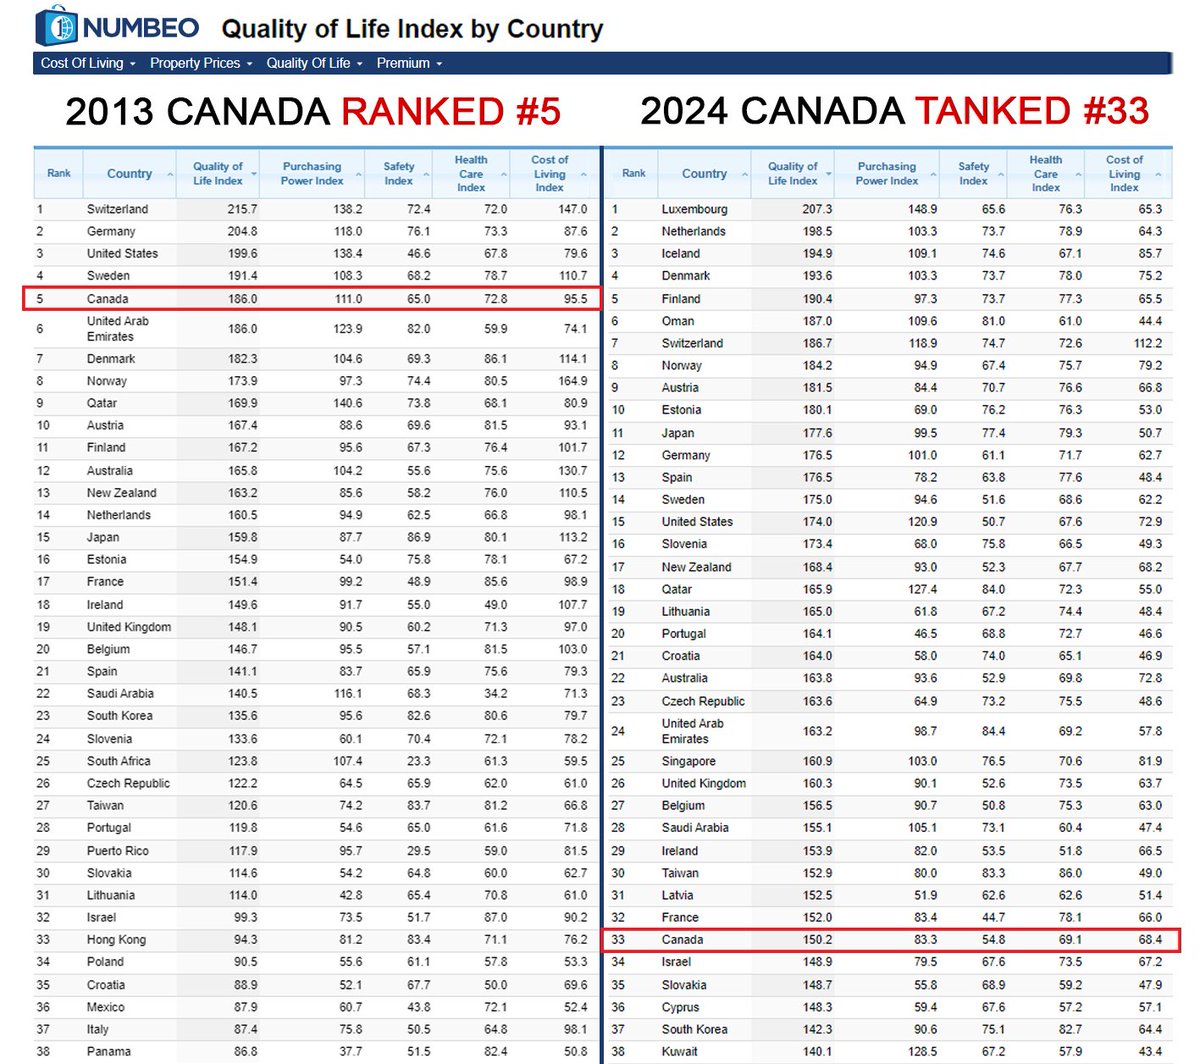 ATTENTION ALL CANADIANS!
THE RESULTS ARE FINALLY IN. 🚨
Follow the money and the numbers...
Just in case anyone still thinks Canada is a good place to live? I present the 'quality of life index'. We were ranked #5 in the world in 2013. After 1 year of Justin Trudeau we had